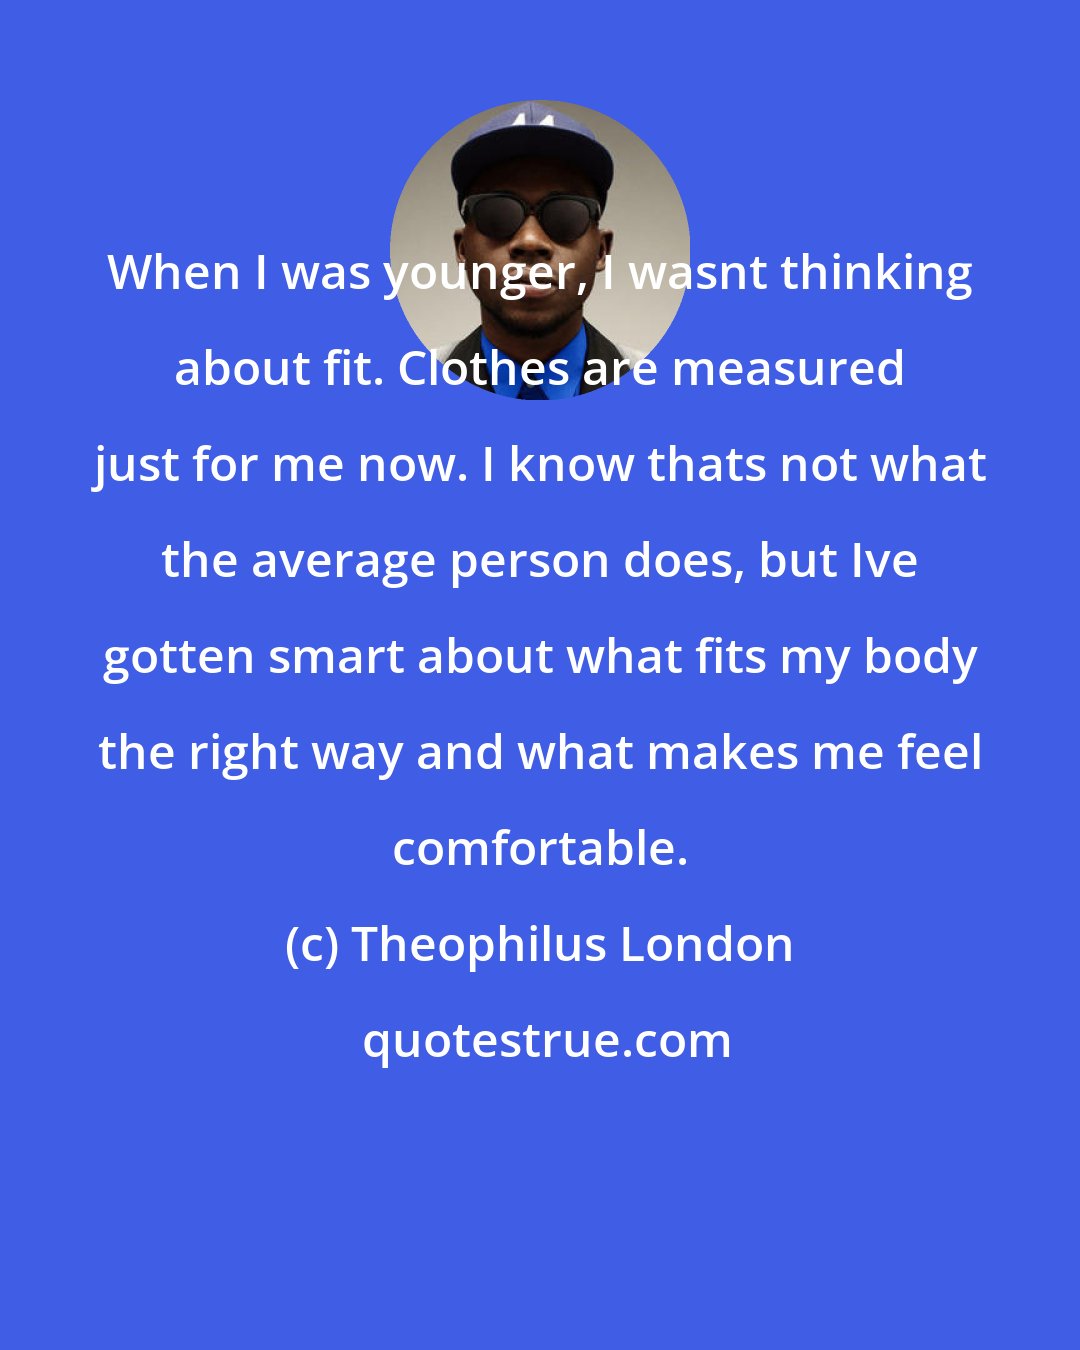 Theophilus London: When I was younger, I wasnt thinking about fit. Clothes are measured just for me now. I know thats not what the average person does, but Ive gotten smart about what fits my body the right way and what makes me feel comfortable.